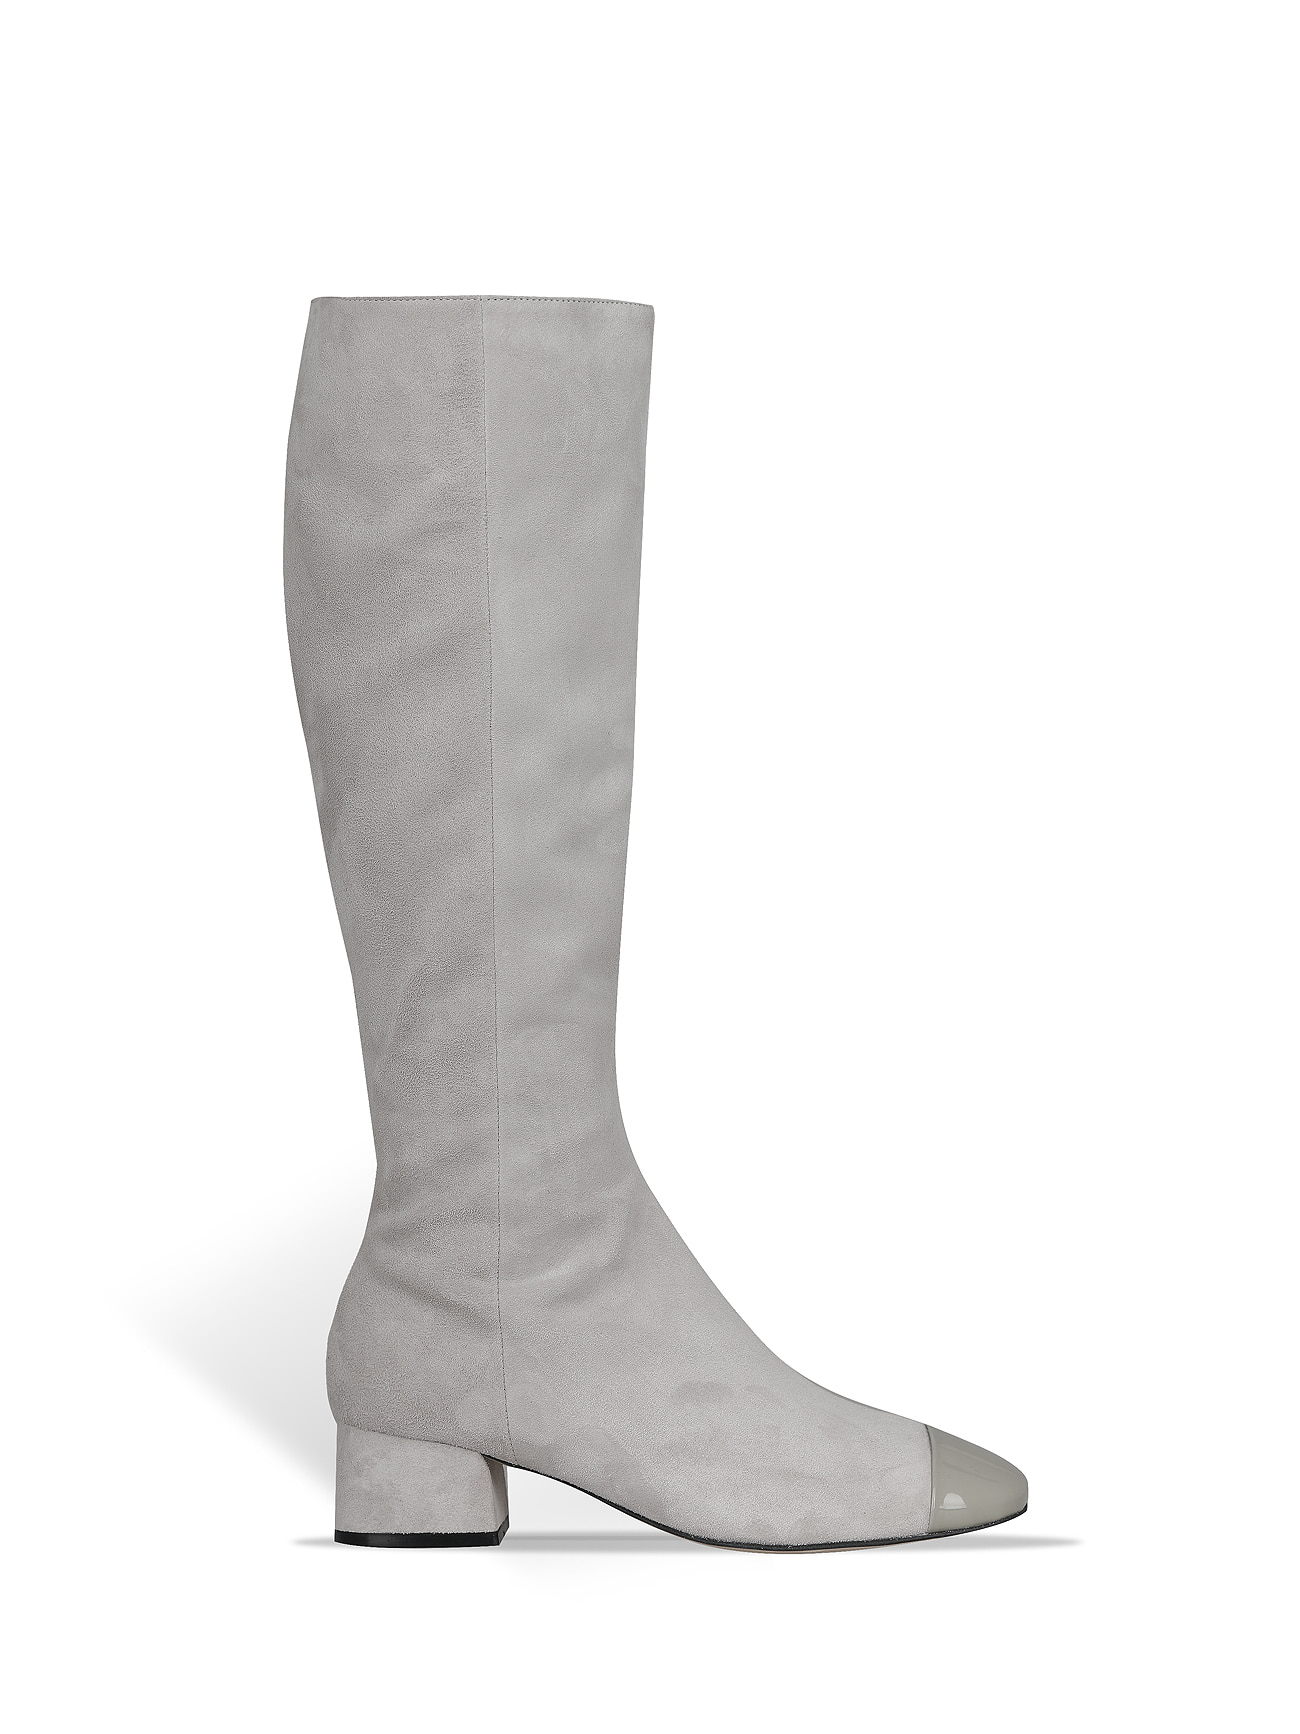 JANE SUEDE KNEE HIGH BOOTS - GRAY